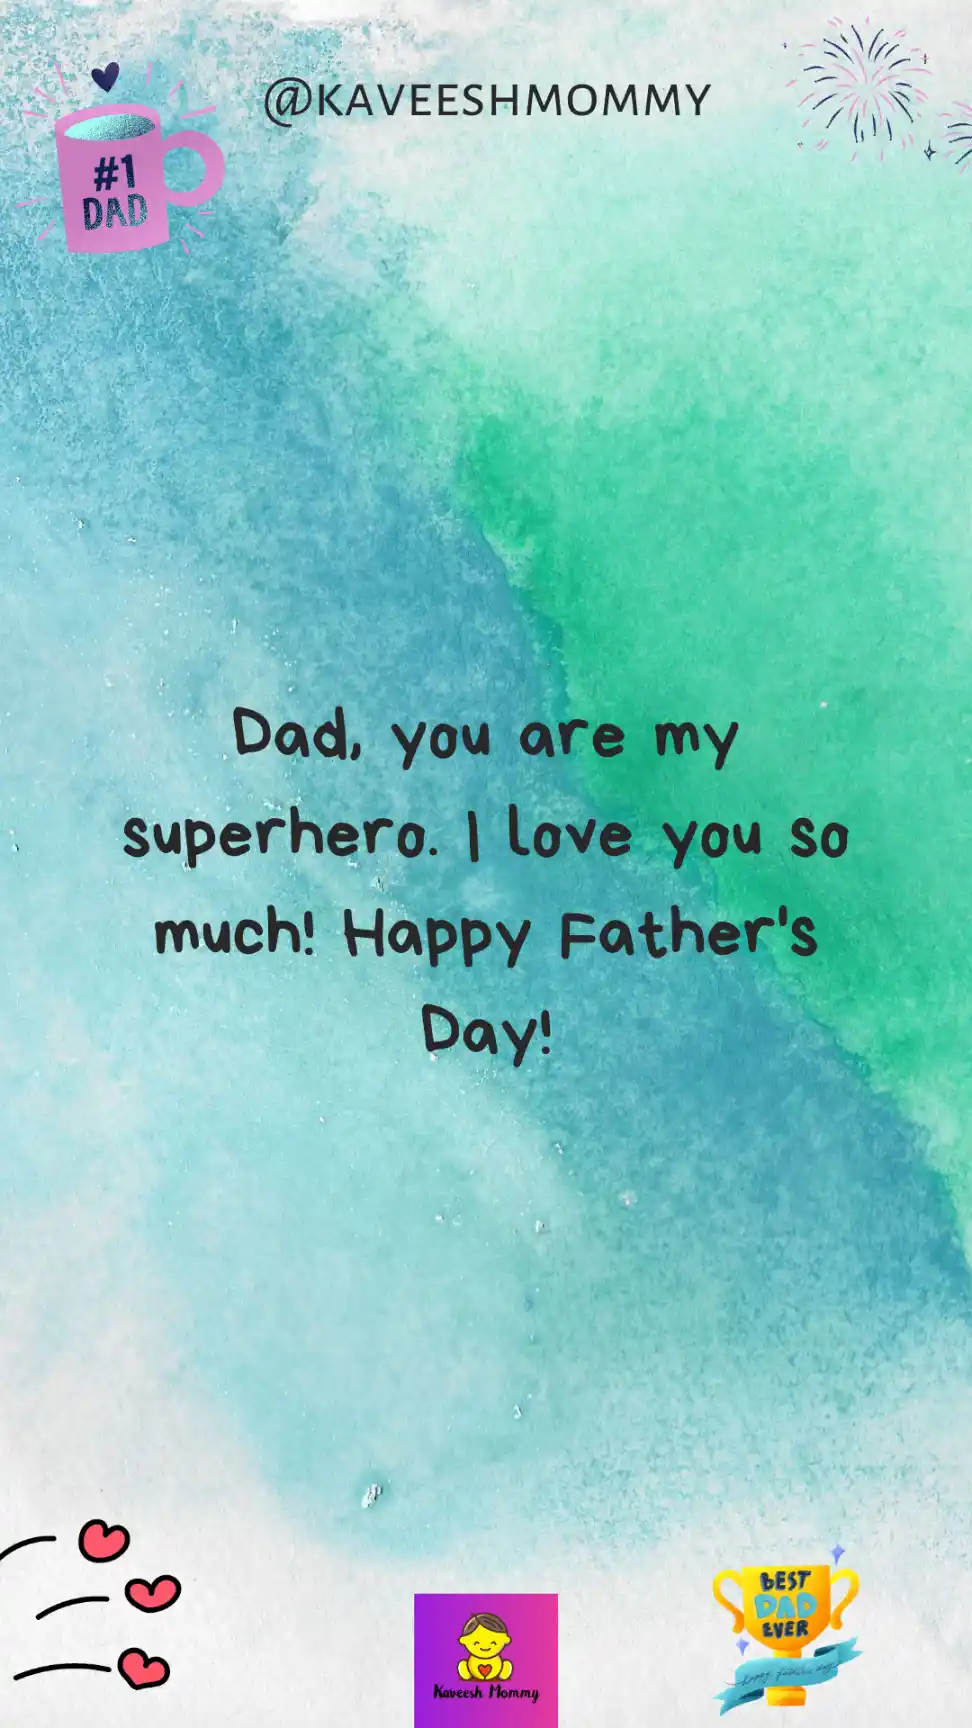 happy fathers day mom quotes-Dad, you are my superhero. I love you so much! Happy Father's Day!